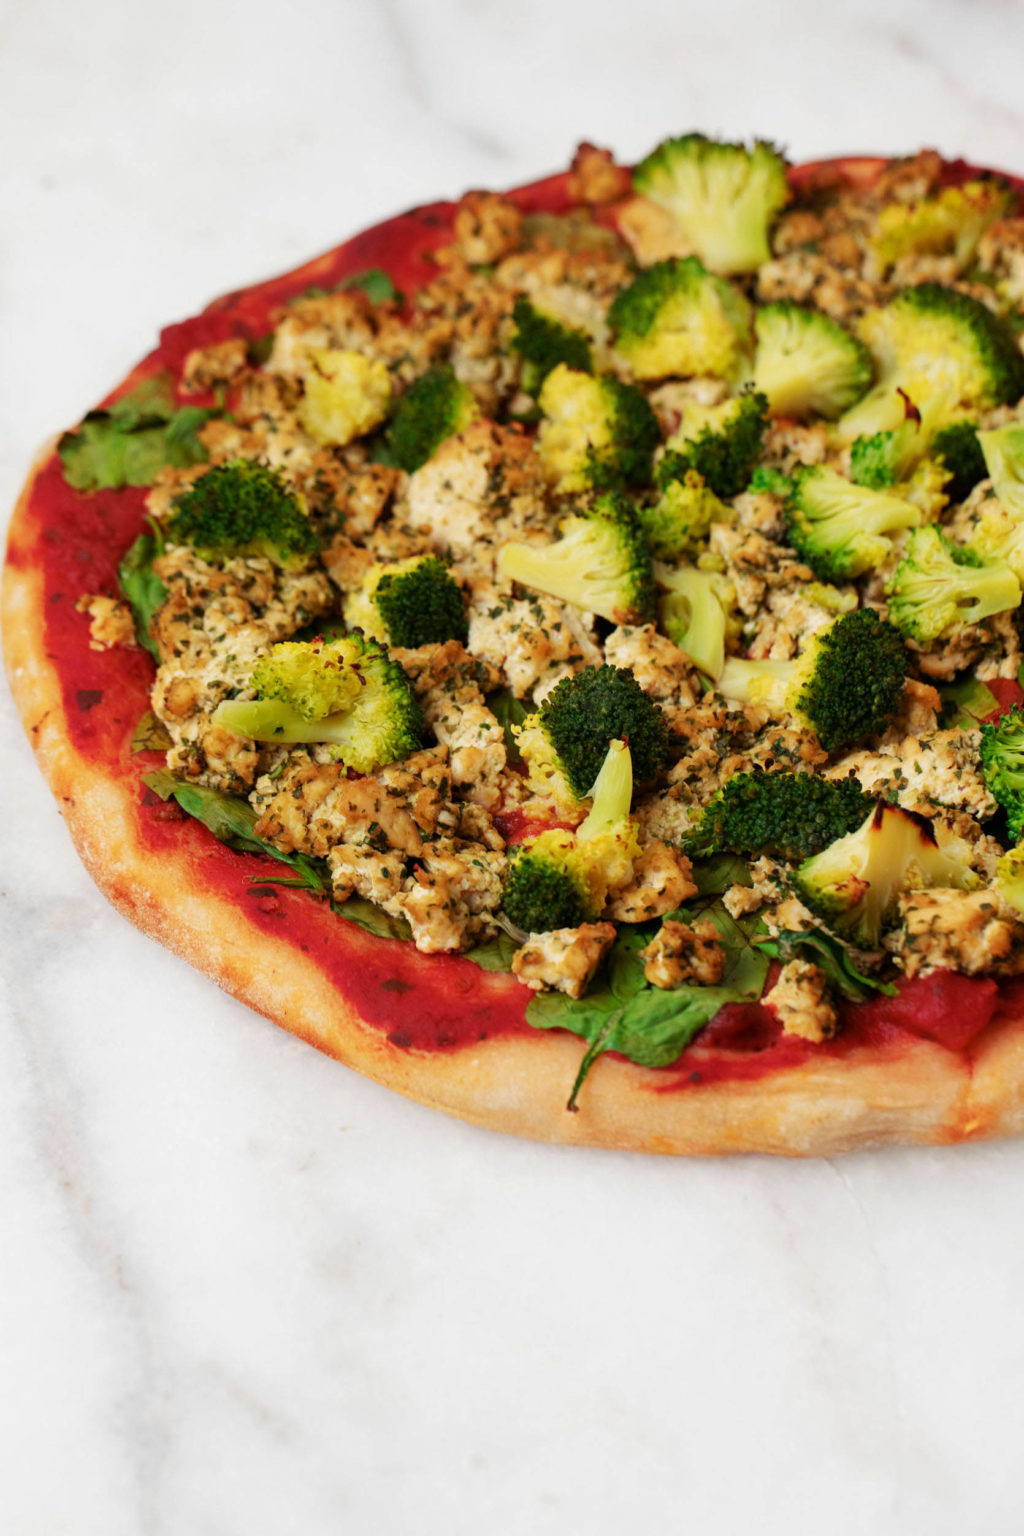 A plant-based green goodness pizza is topped with vegetables and herbs. It's perched on a marble surface.